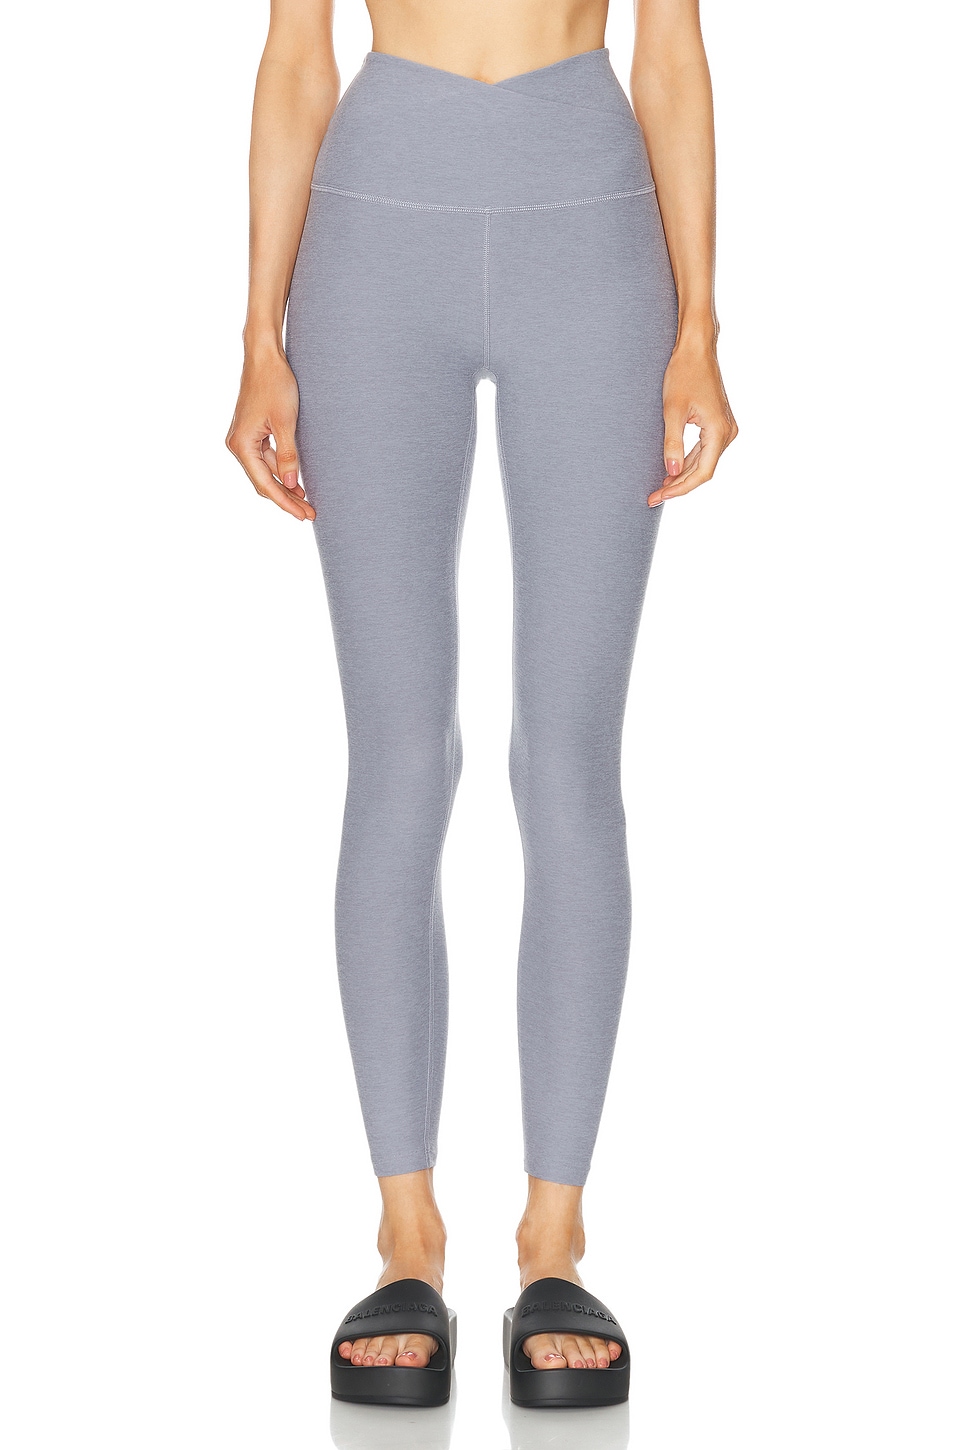 Spacedye At Your Leisure High Waisted Midi Legging in Grey